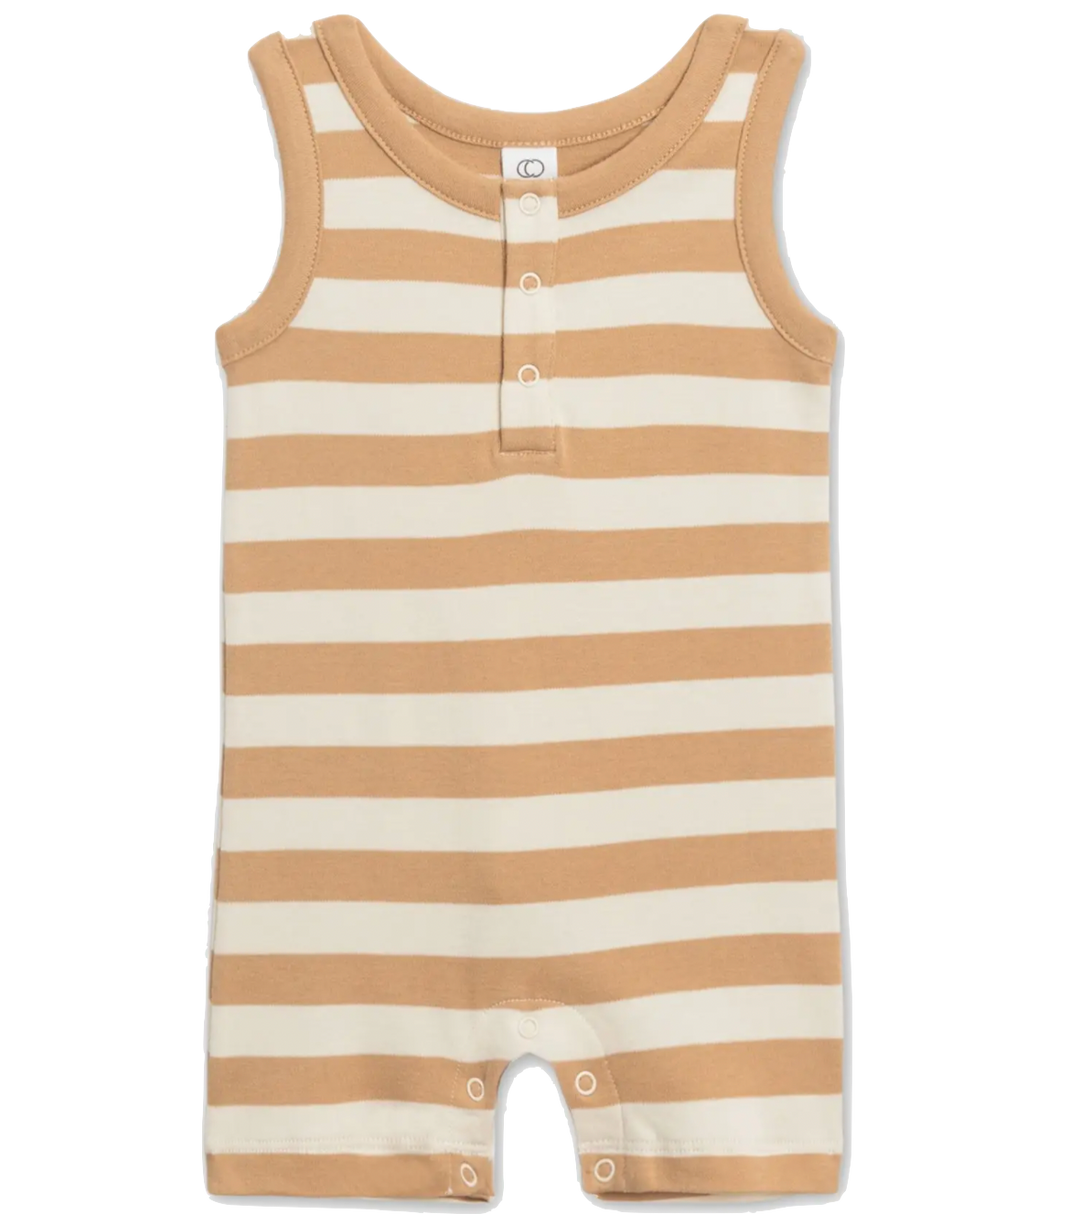 Colored Organics Henley shorts romper in stripes